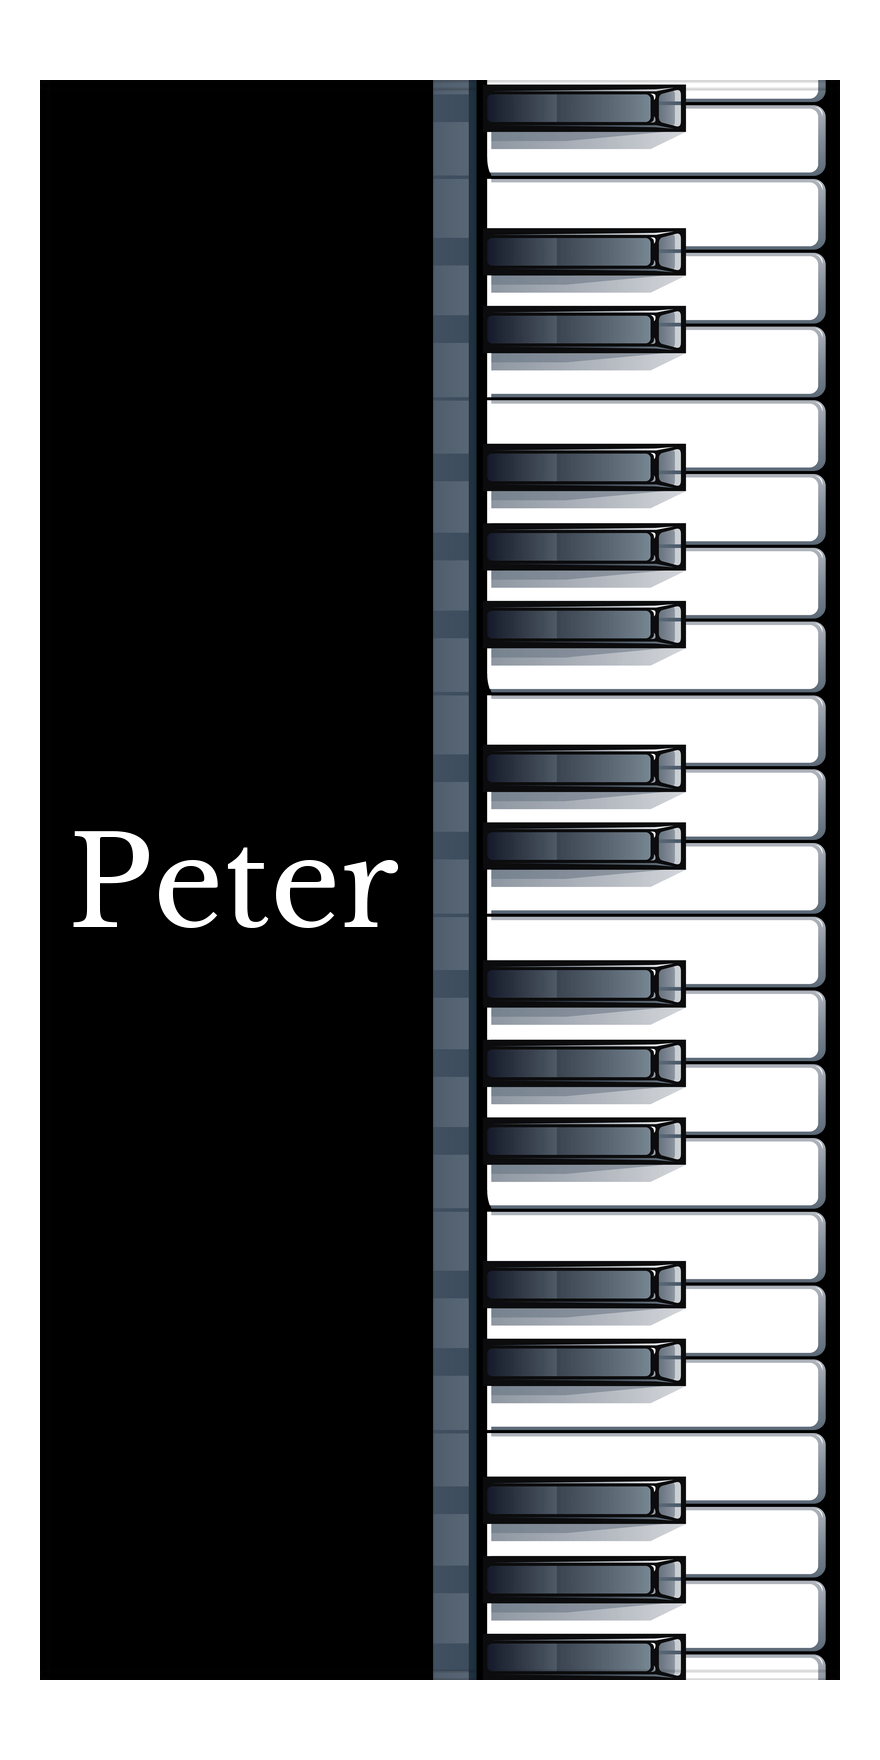 Personalized Piano Keys Beach Towel - Black Background - Vertical with Left Text - Front View